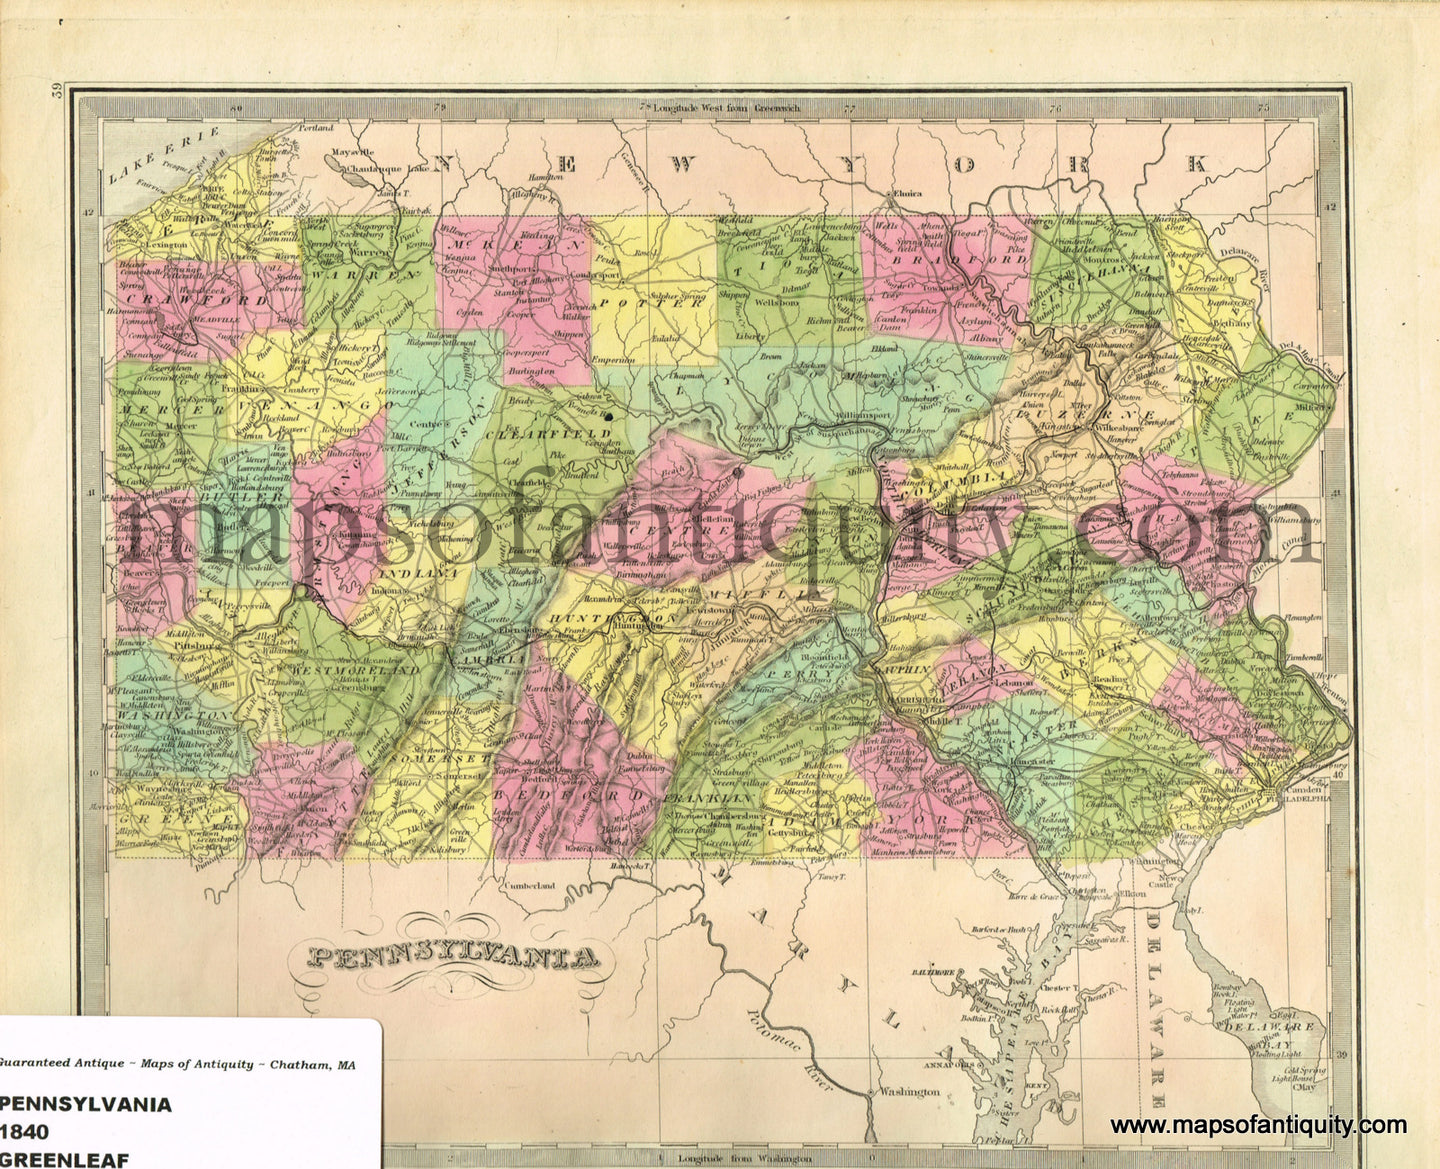 Antique-Hand-Colored-Map-Pennsylvania-Pennsylvania---1840-Greenleaf-Maps-Of-Antiquity